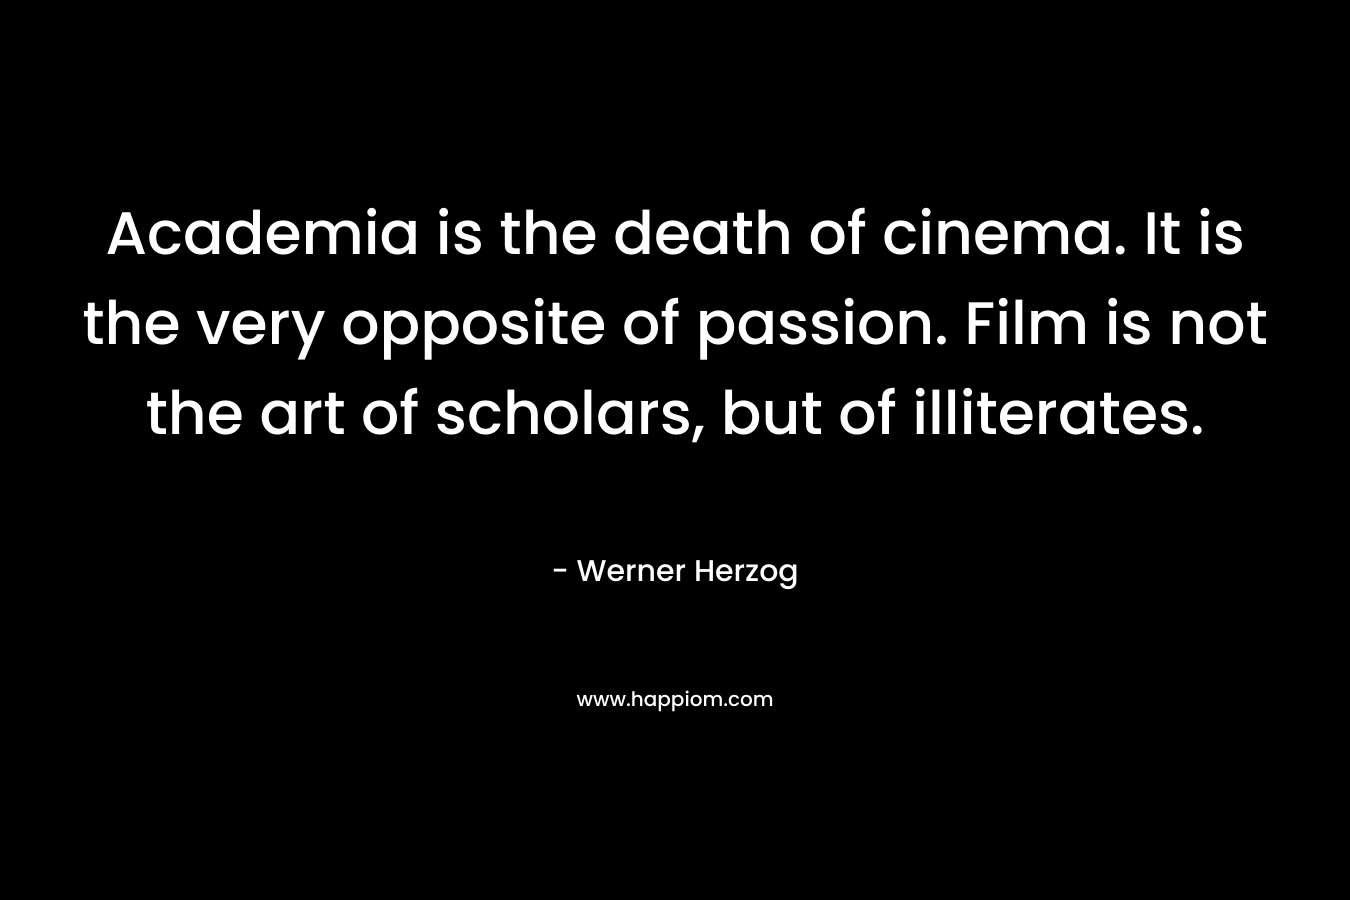 Academia is the death of cinema. It is the very opposite of passion. Film is not the art of scholars, but of illiterates.